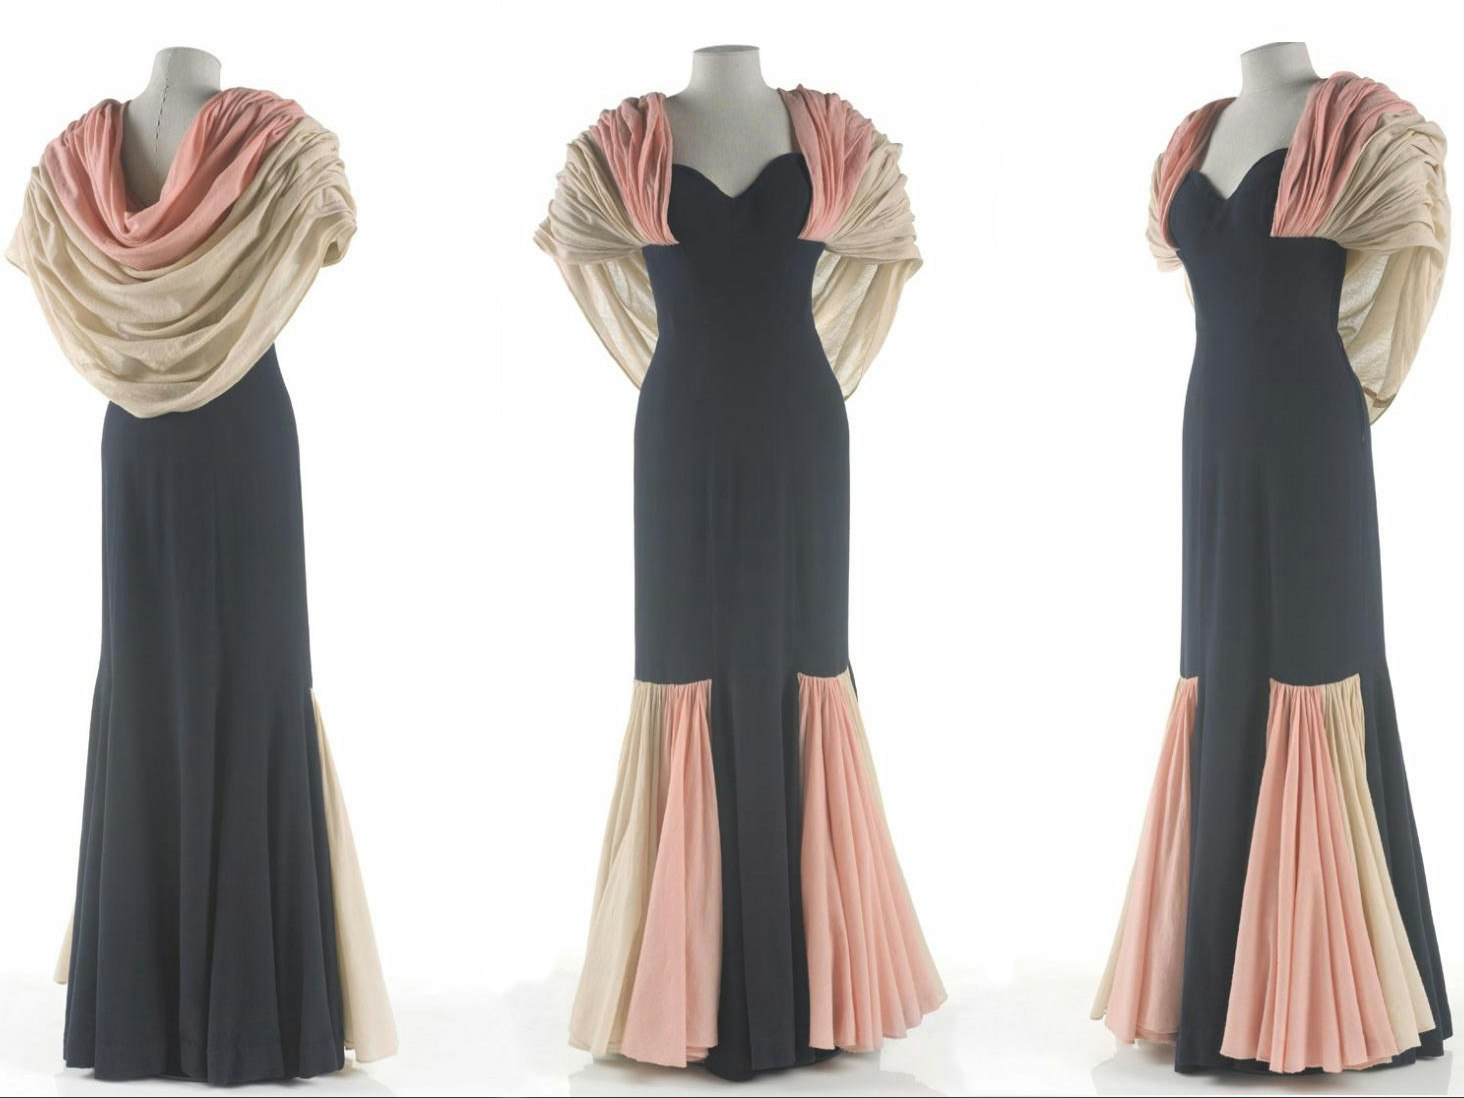 Three views of a pink, white, and black dress